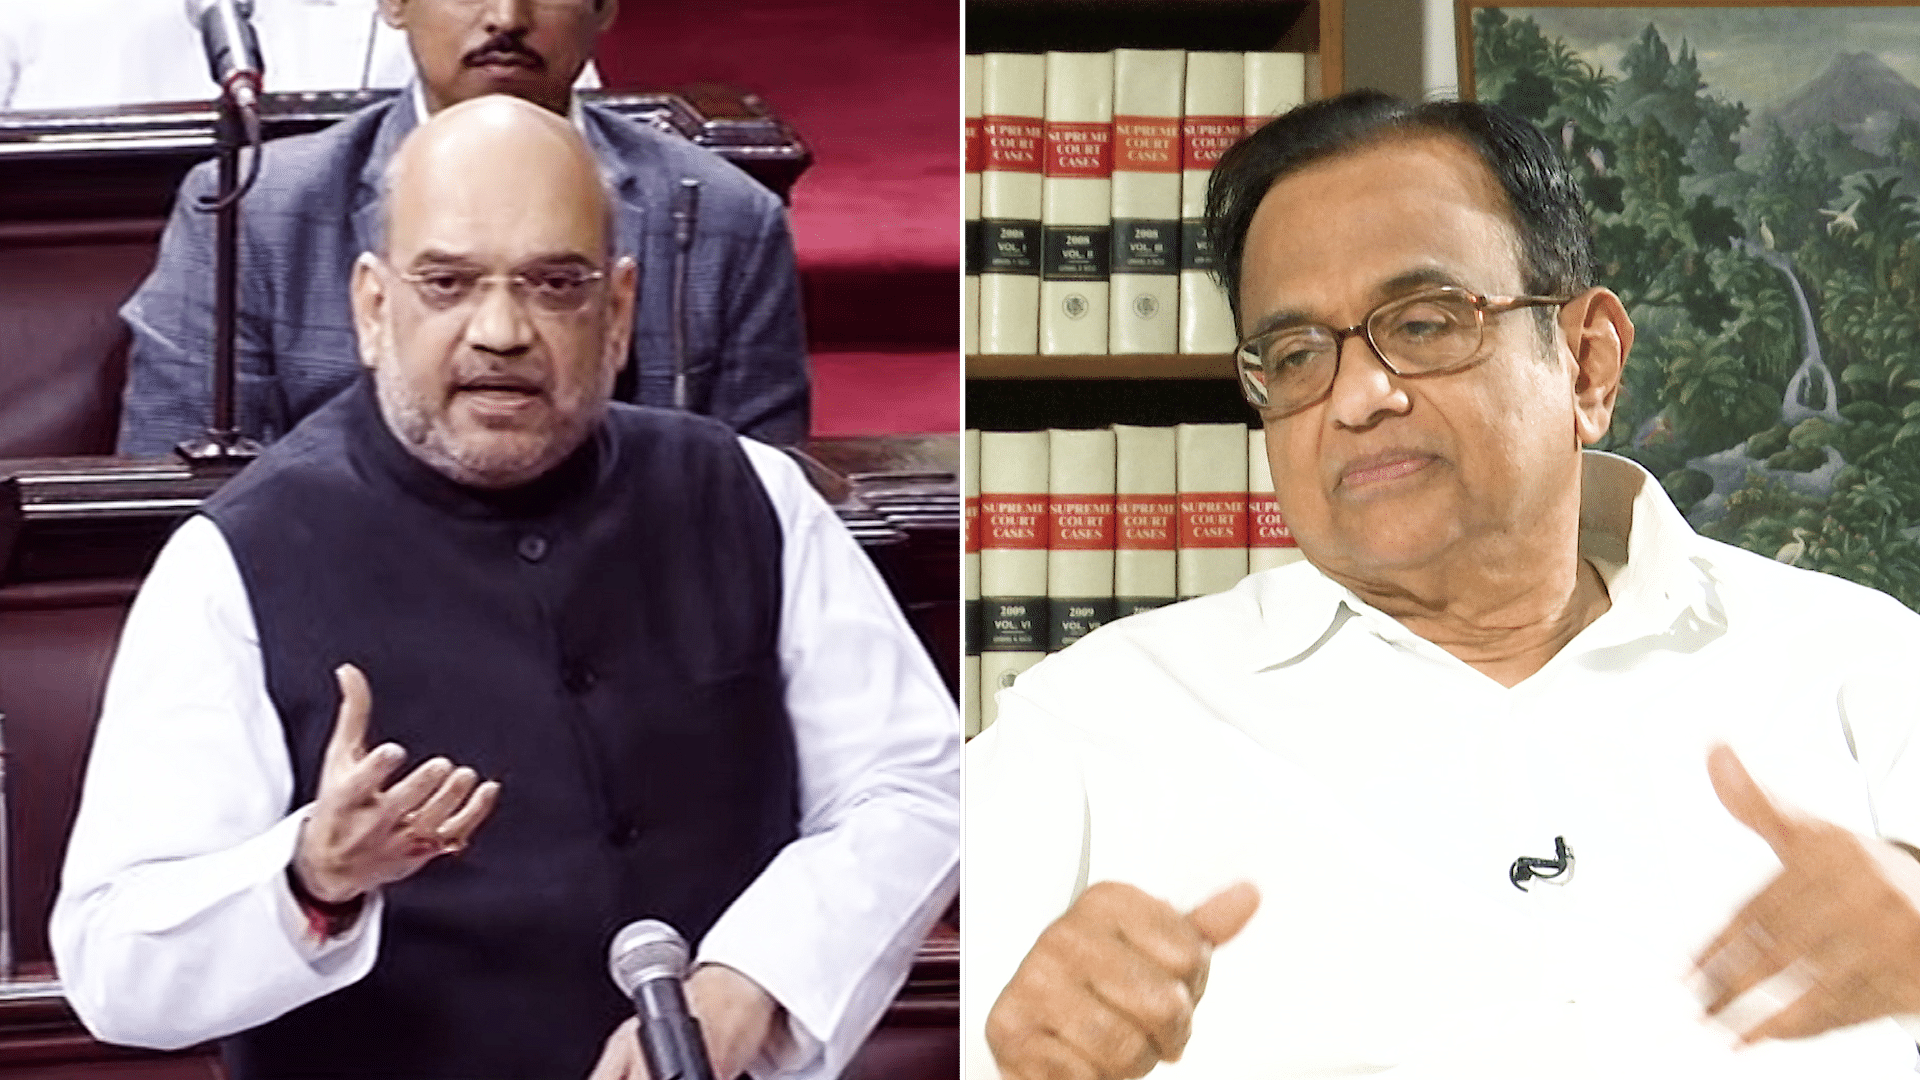 Amit Shah and P Chidambaram have been engaged in a war of words over PM Modi’s ‘Pakoda’ comment.